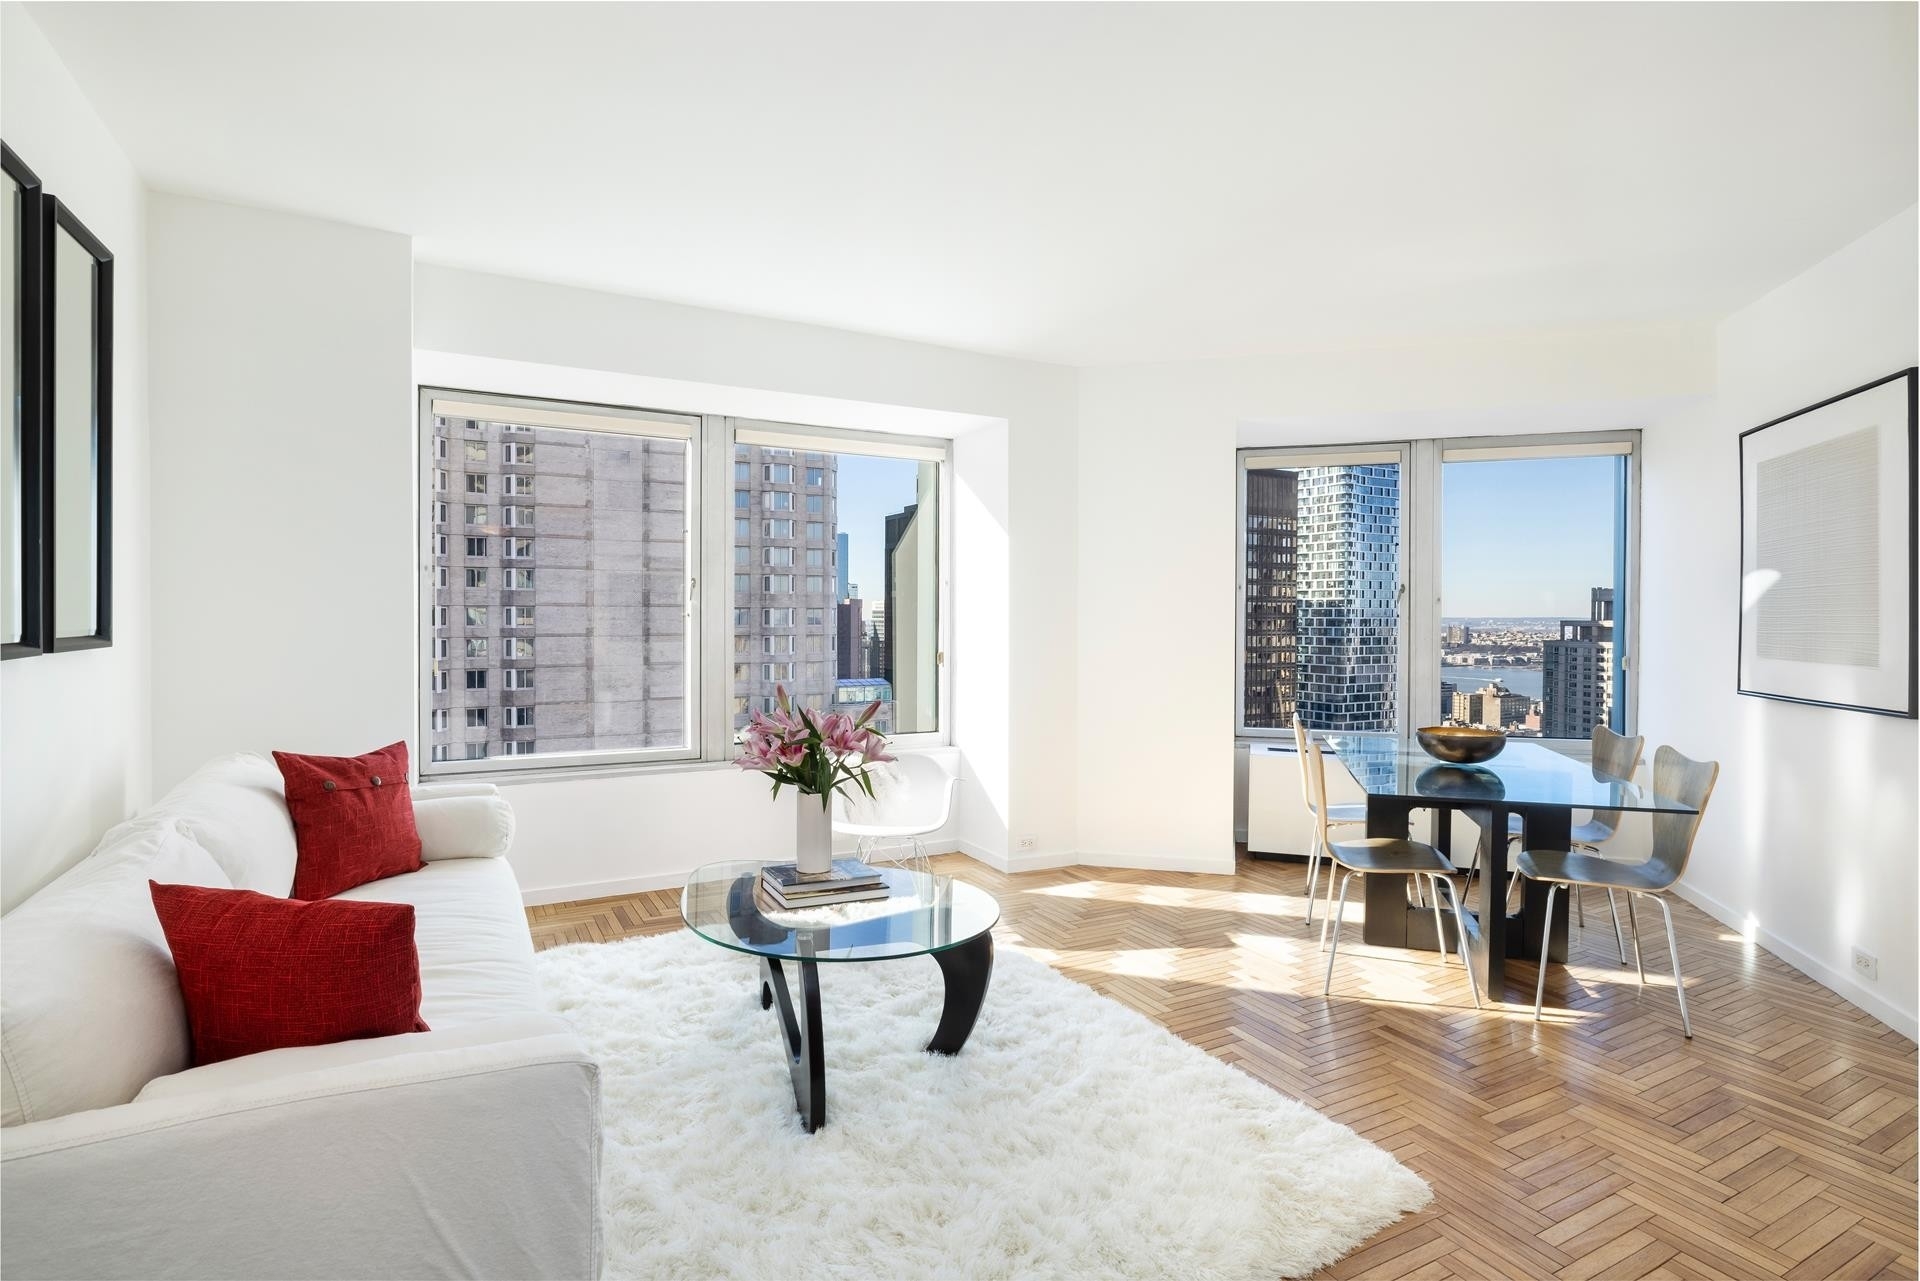 1. Condominiums for Sale at Cityspire, 150 W 56TH ST, 4110 Midtown West, New York, NY 10019